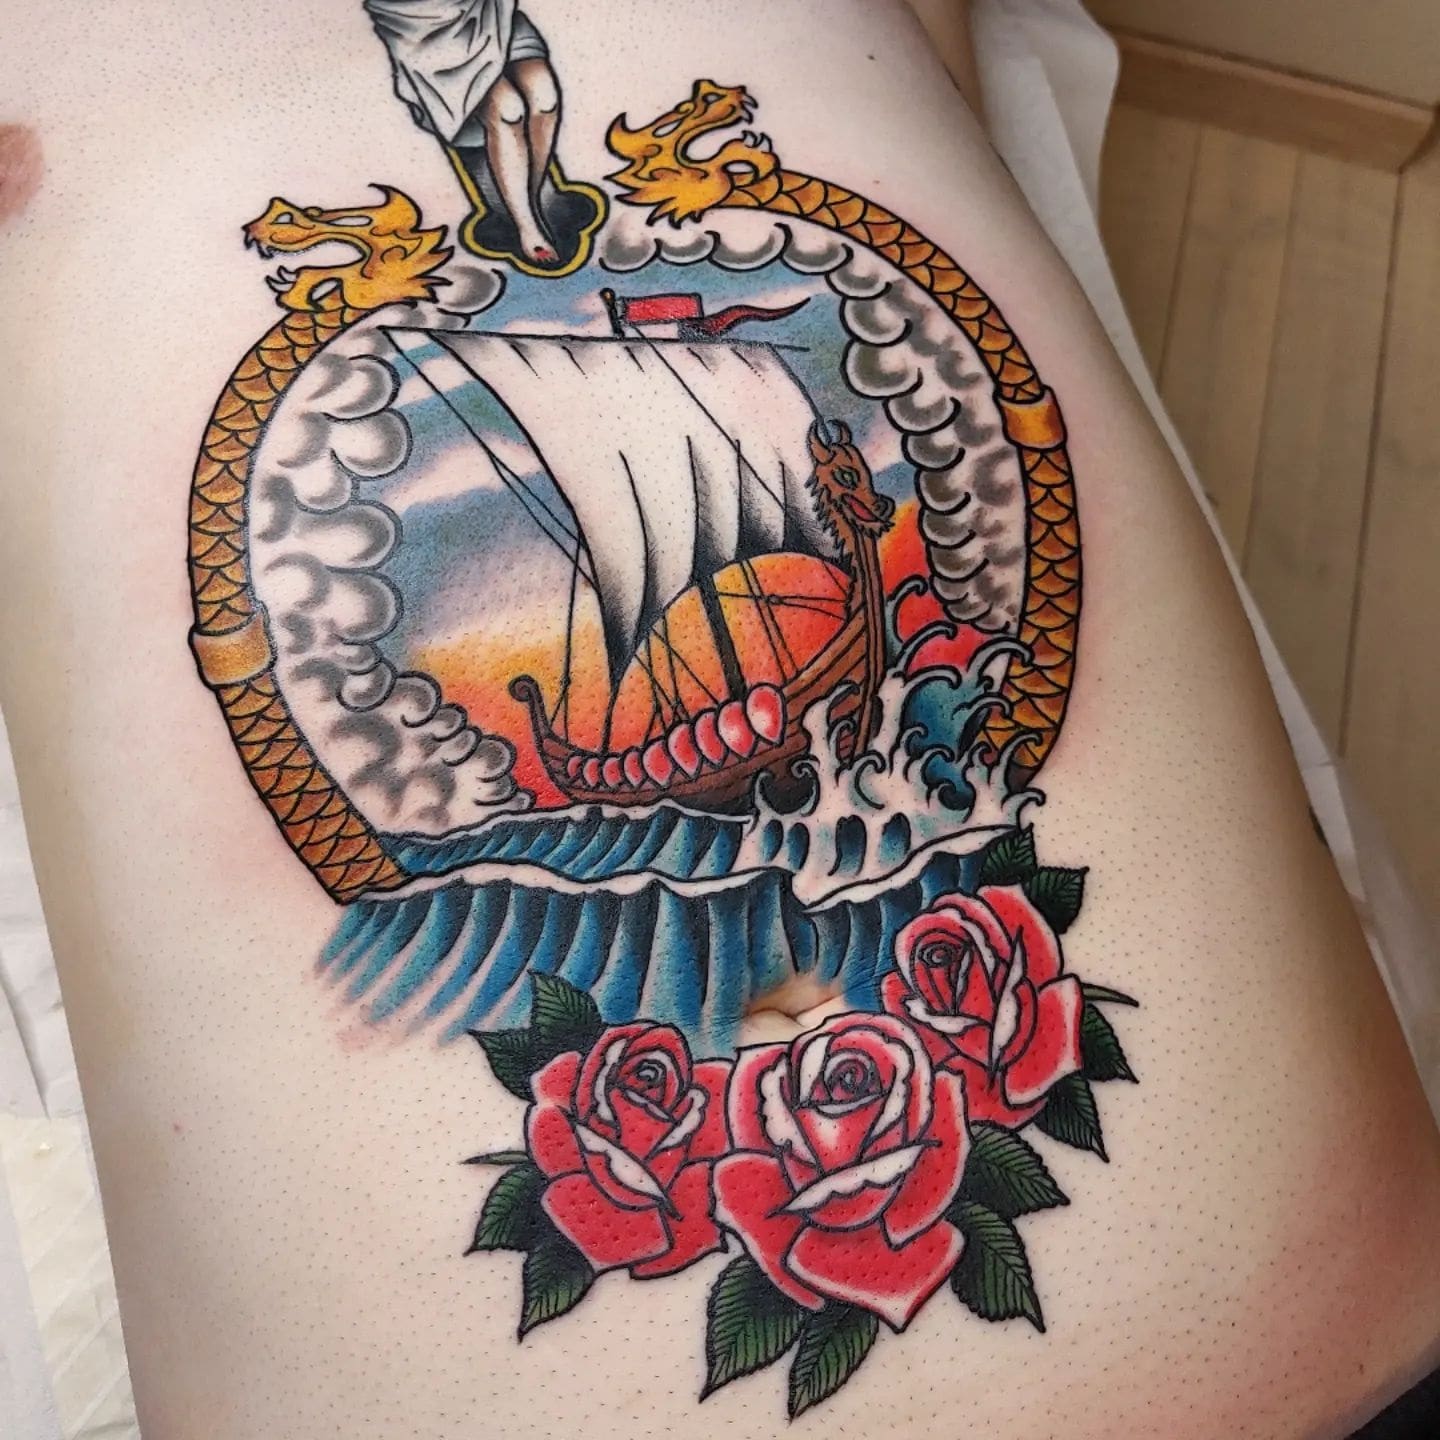 Ship and Roses Tattoo